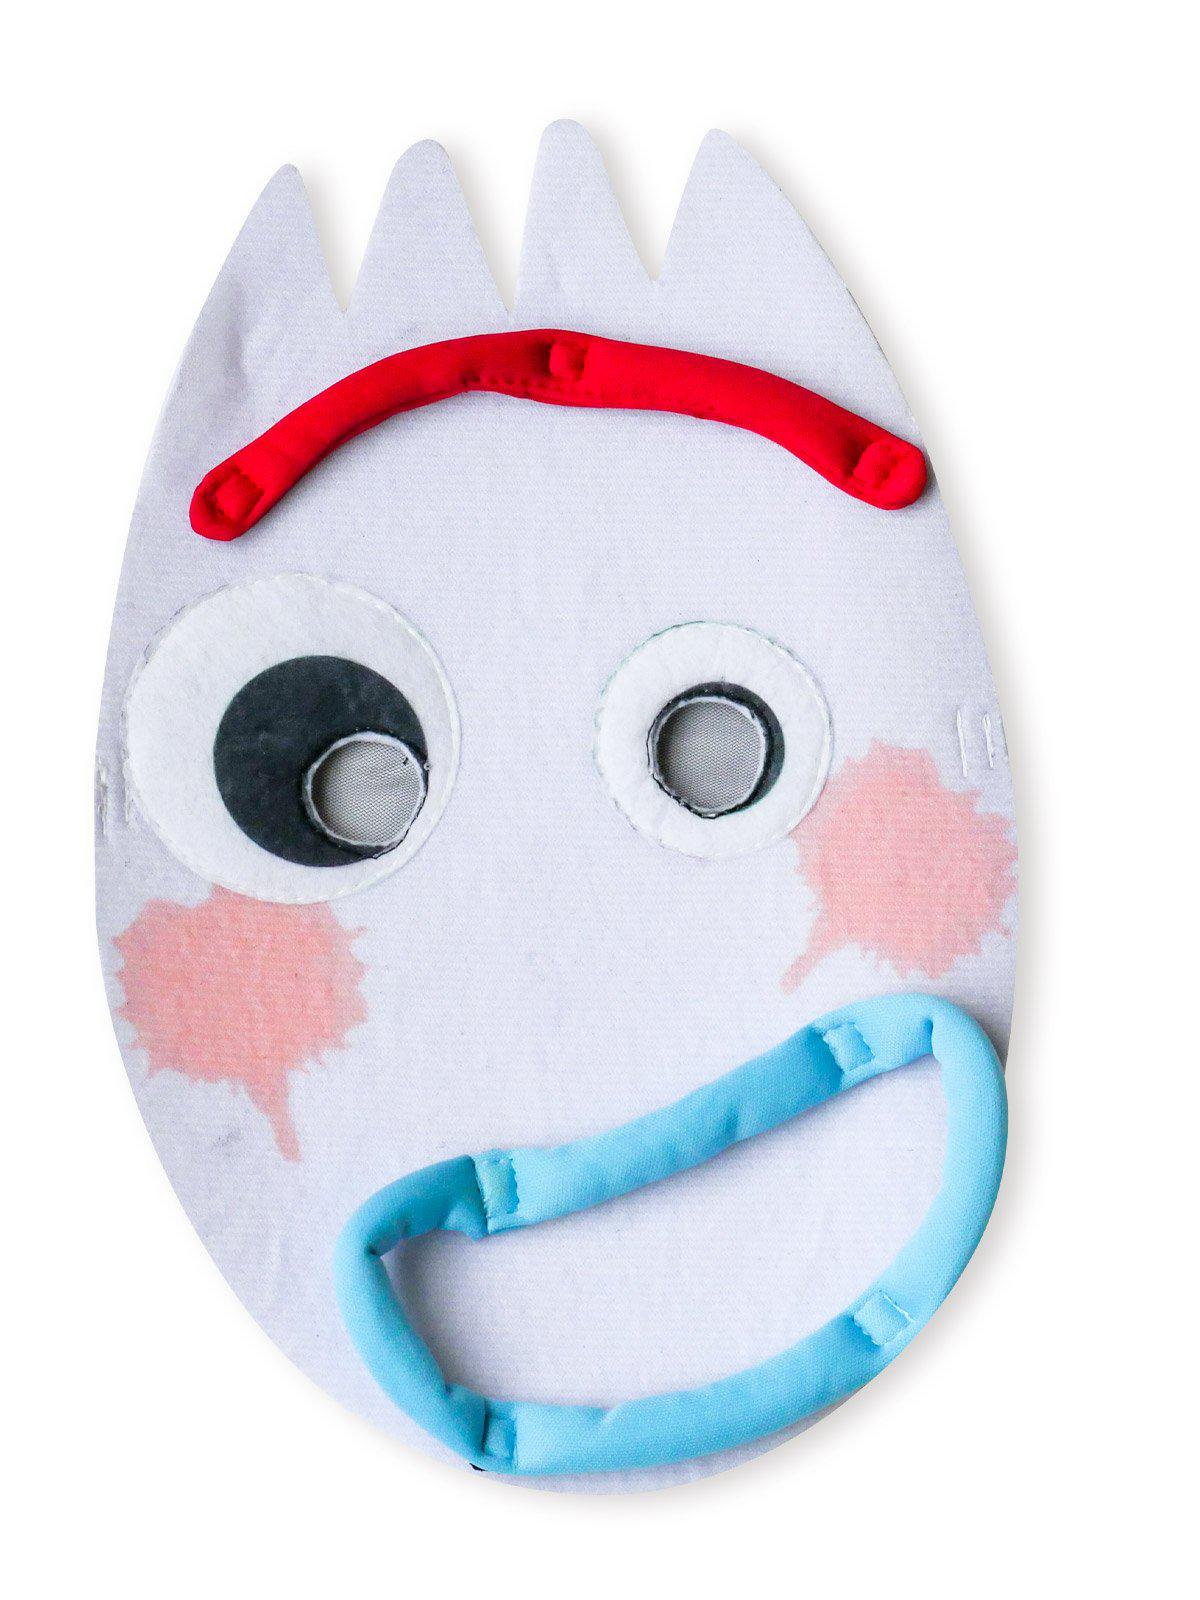 Forky Toy Story 4 Costume Adult